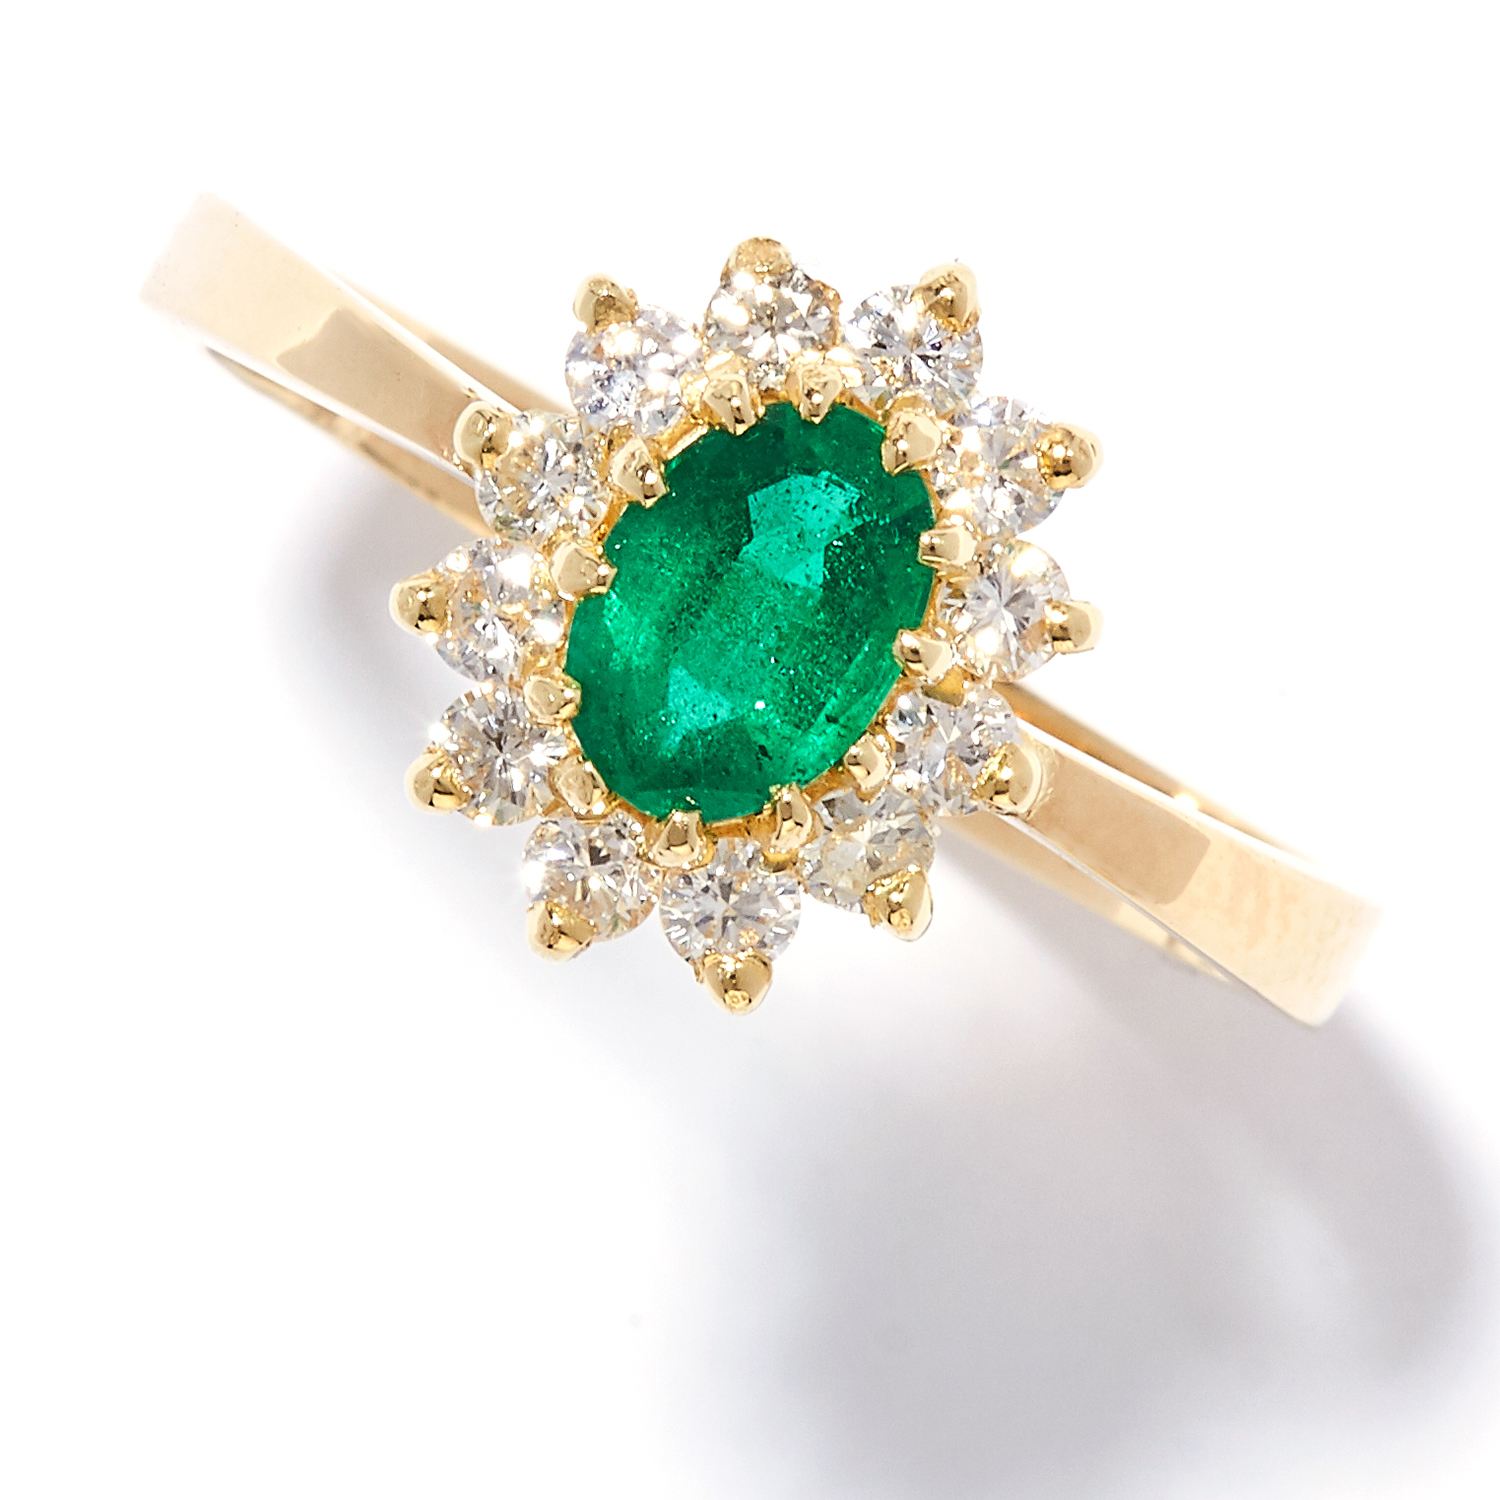 AN EMERALD AND DIAMOND RING in 18ct yellow gold, the oval cut emerald set within a border of round